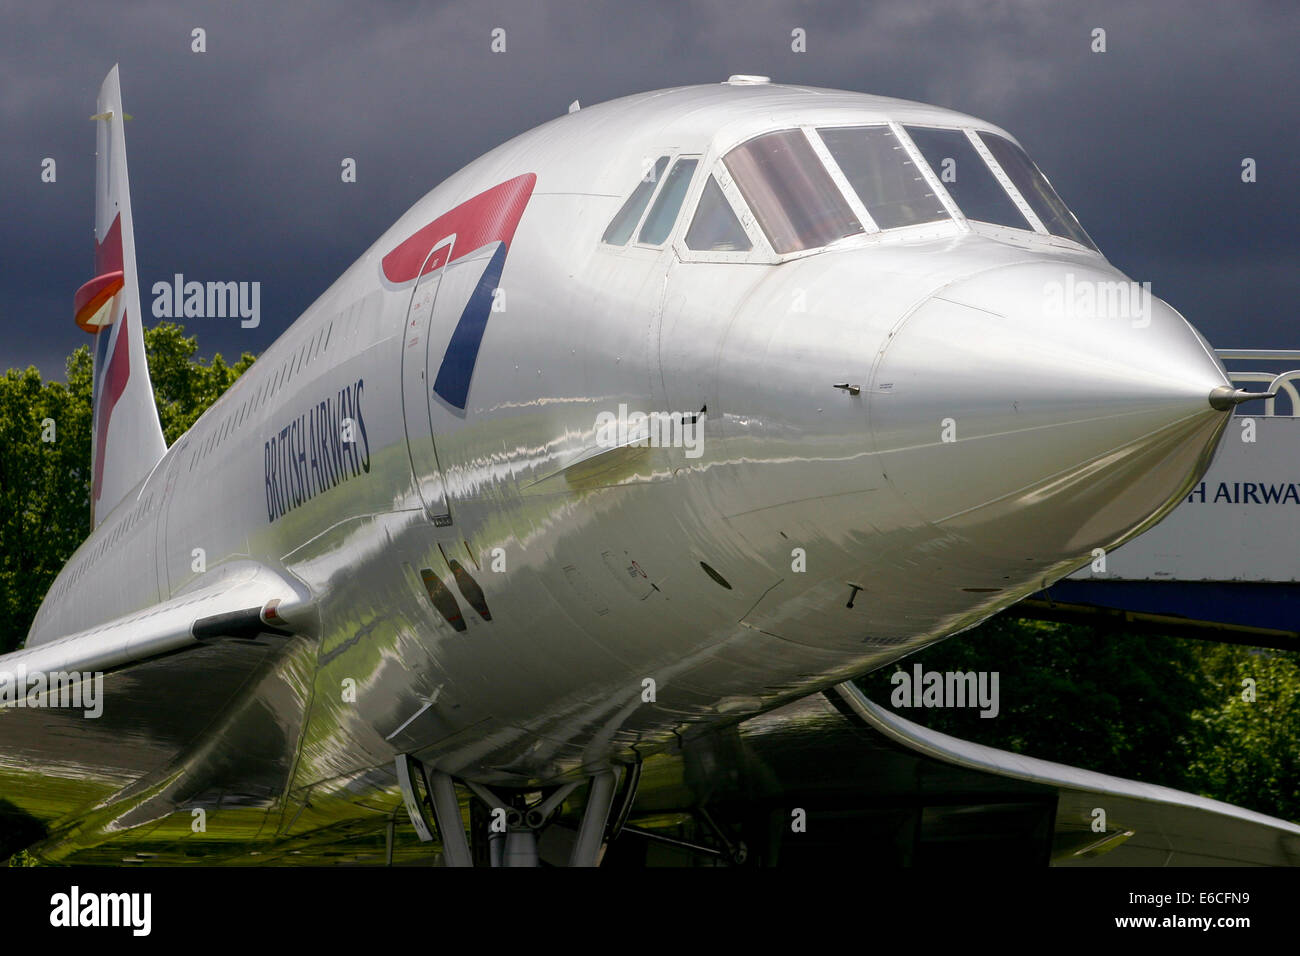 British Airways Concorde rests peacefully at Manchester airport, as a thunderstorm approaches. Stock Photo